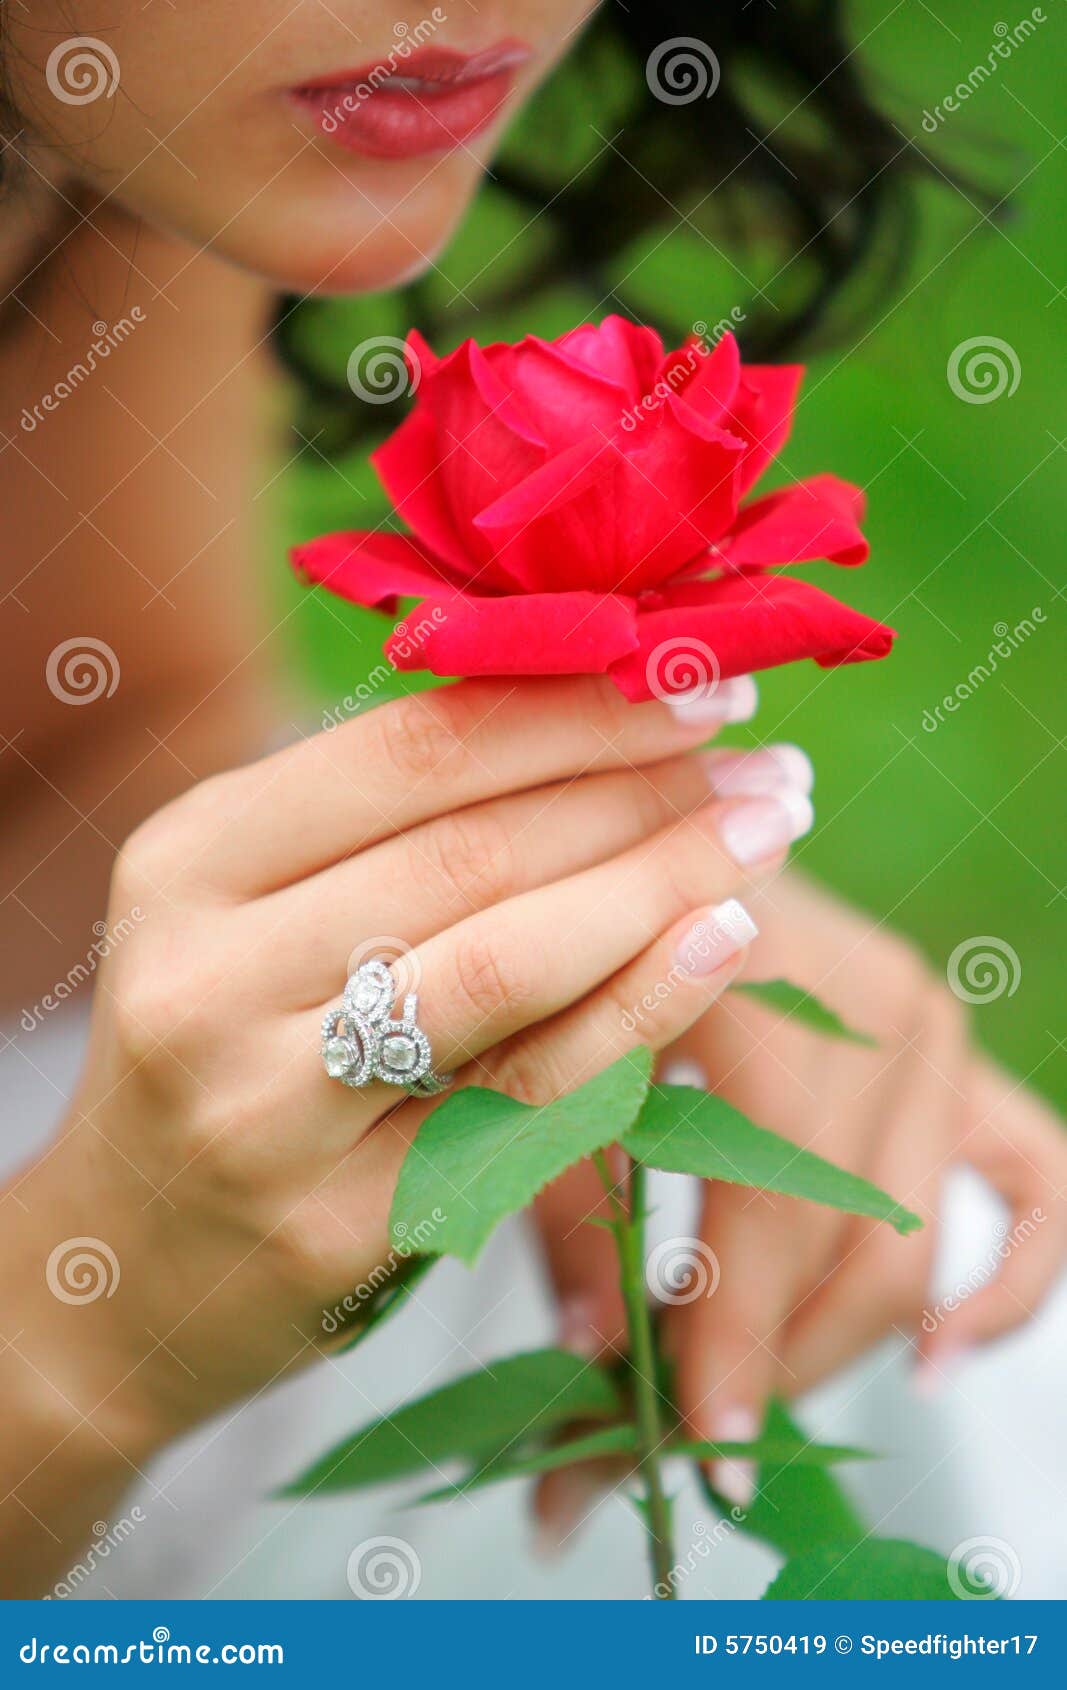 Woman Holding Single Red Rose Stock Image Image Of Affectionate